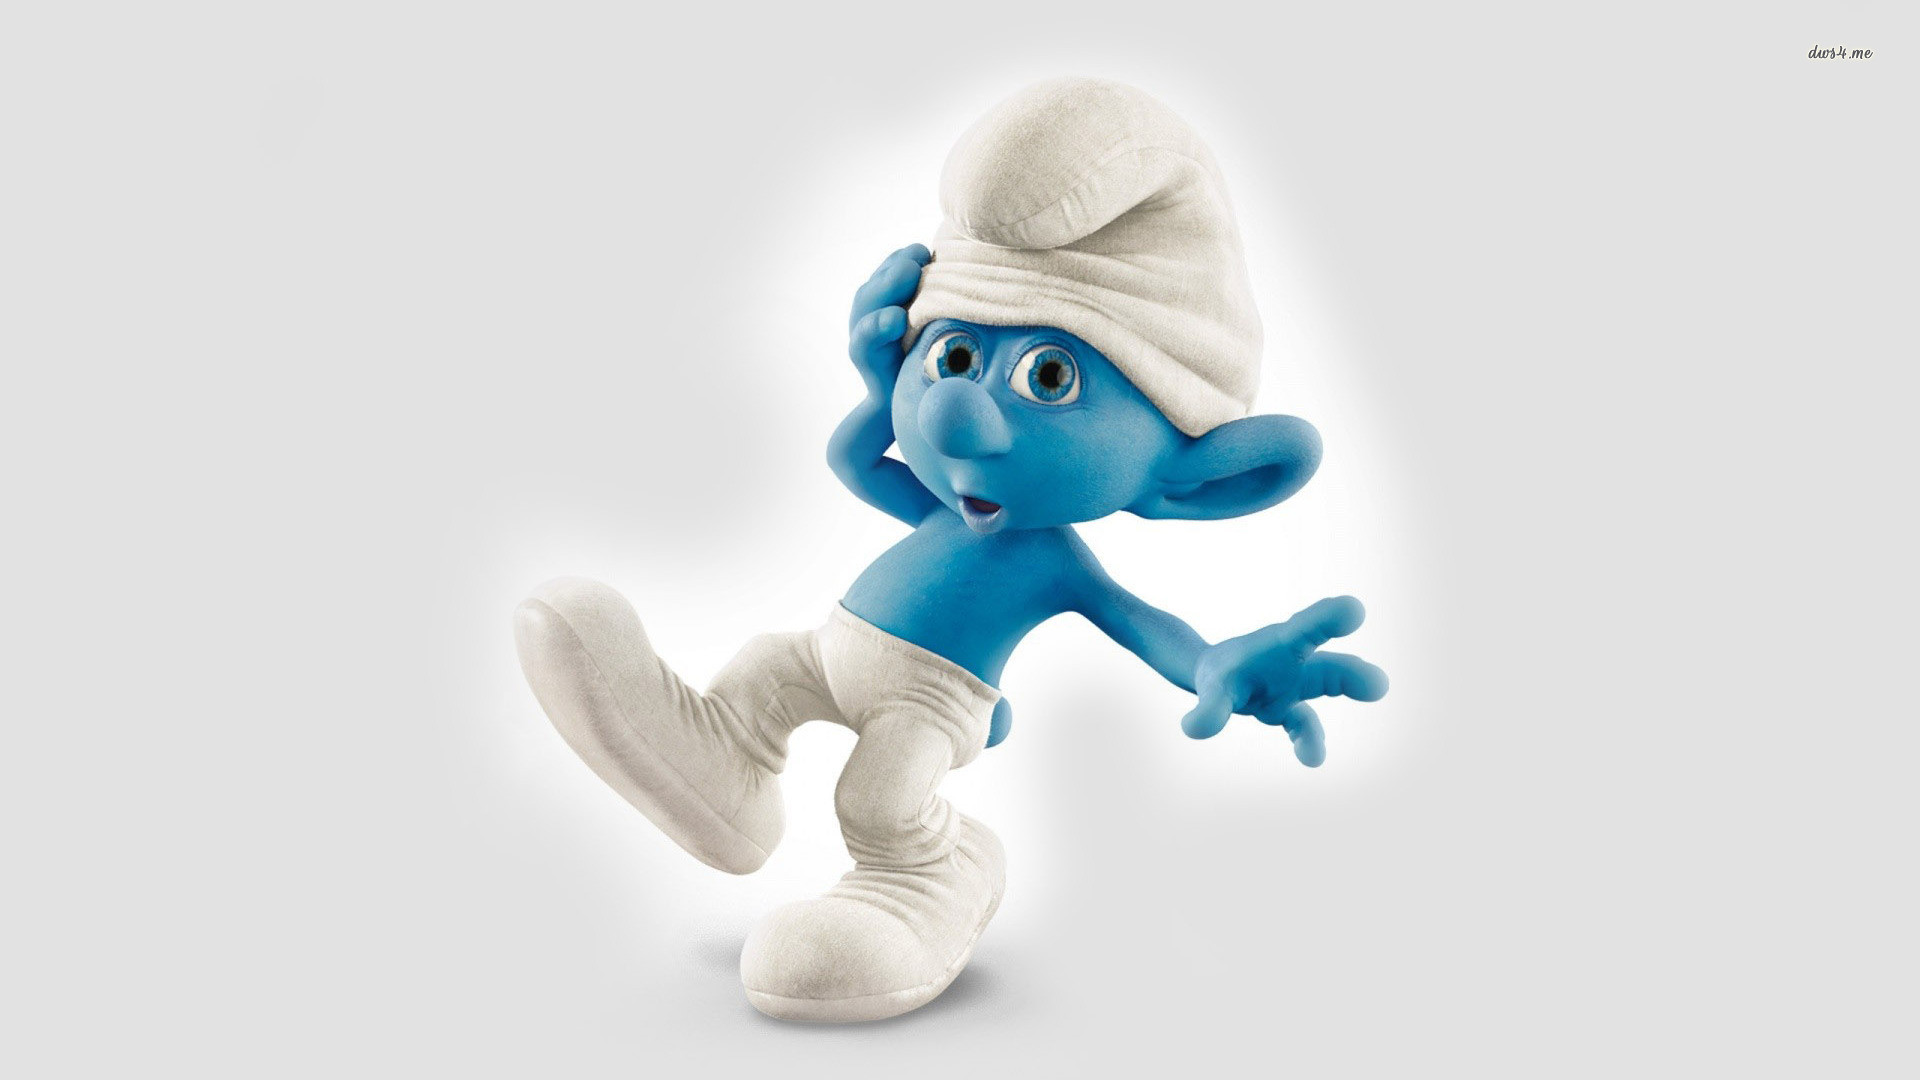 1920x1080 ... Clumsy - The Smurfs wallpaper  ...